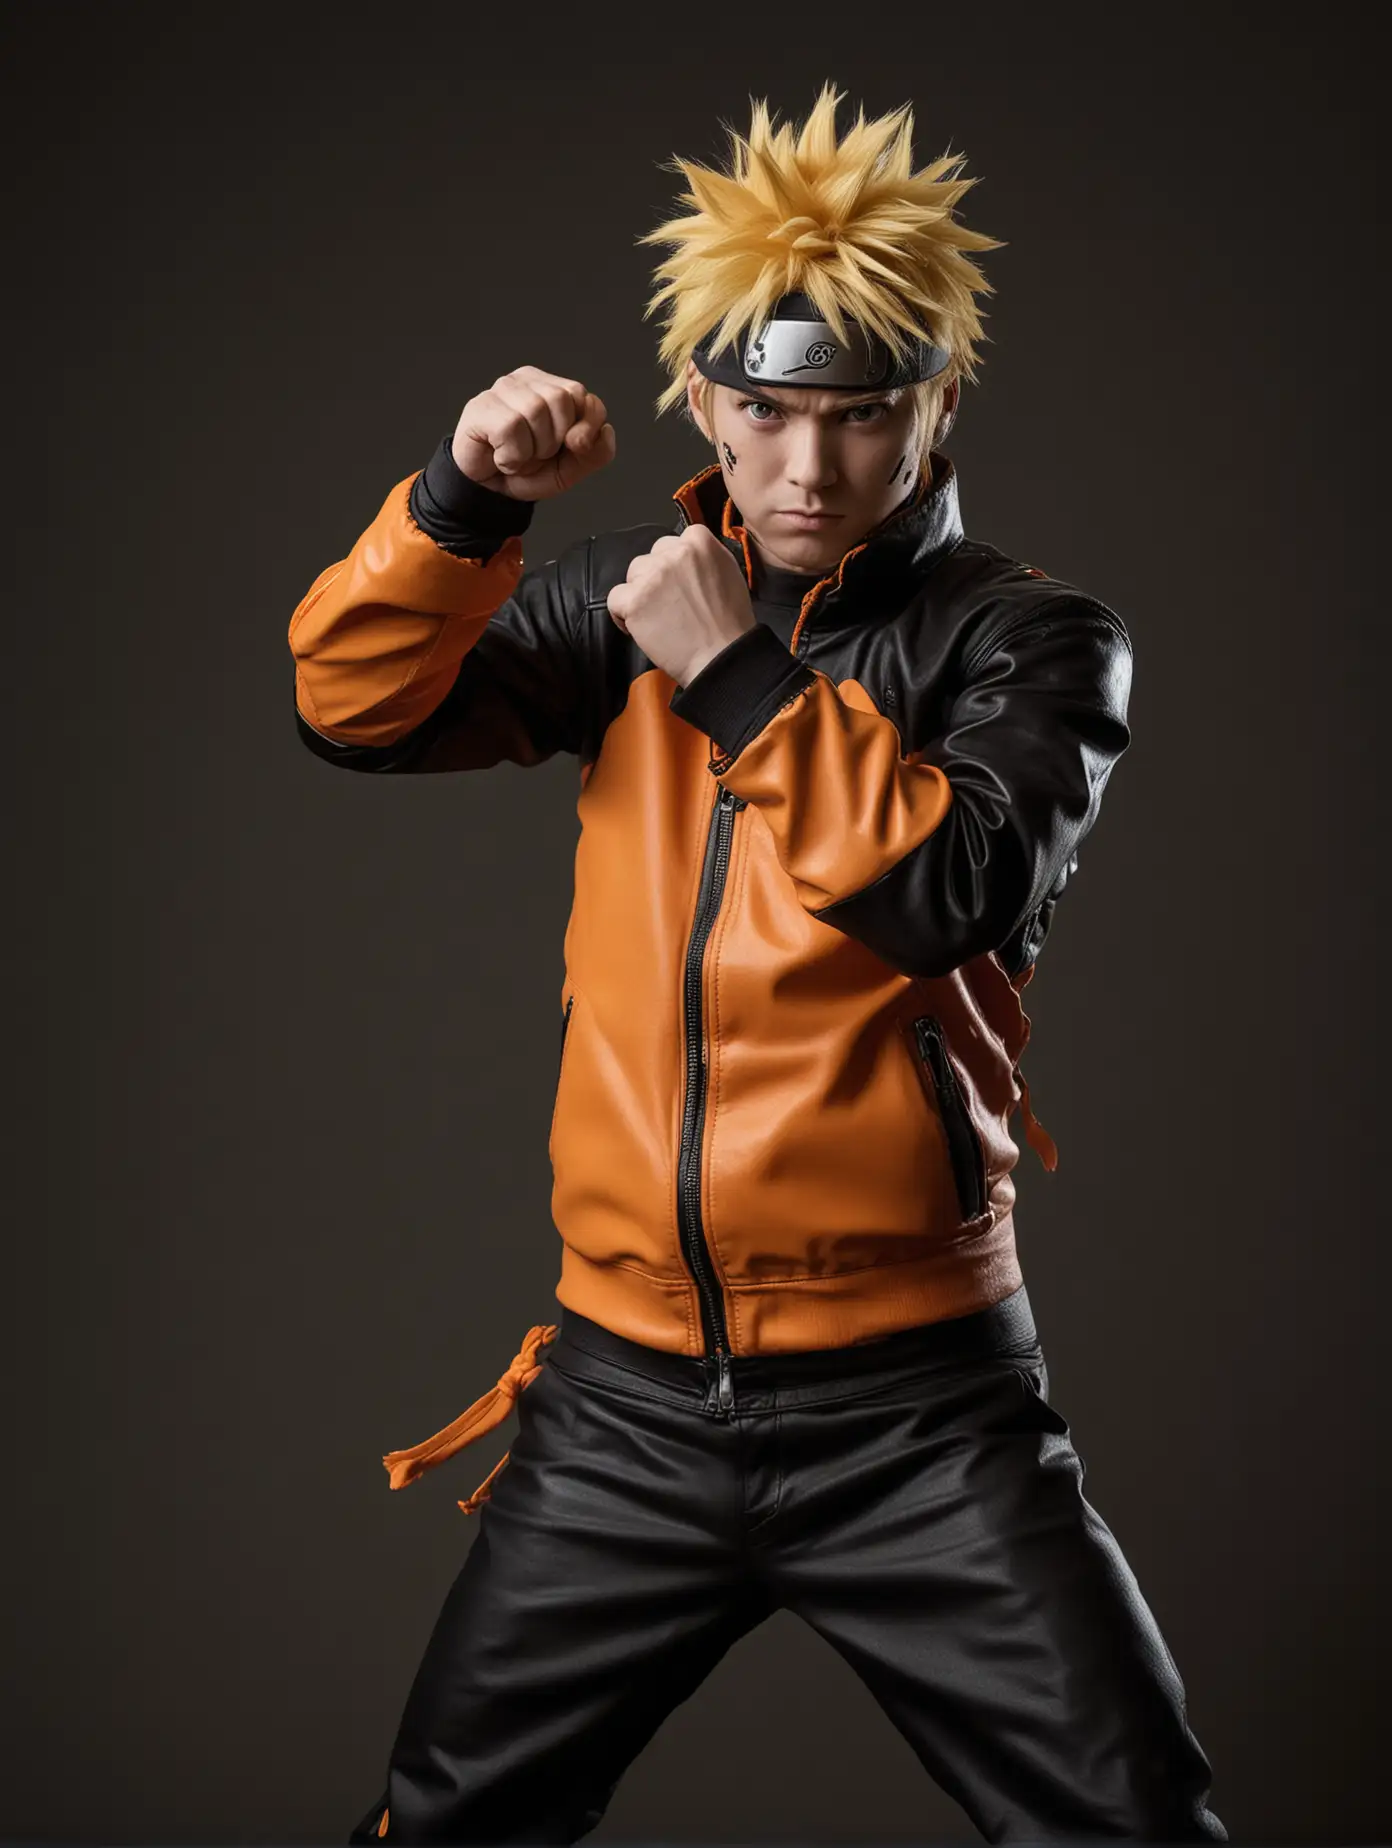 Naruto in real life, Naruto wearing a black and orange jacket with leather sleeves, in a fighting pose, for a studio photography portrait, against a dark background, with studio lighting, yellow hair, leather pants, and an orange ninja cloth headband